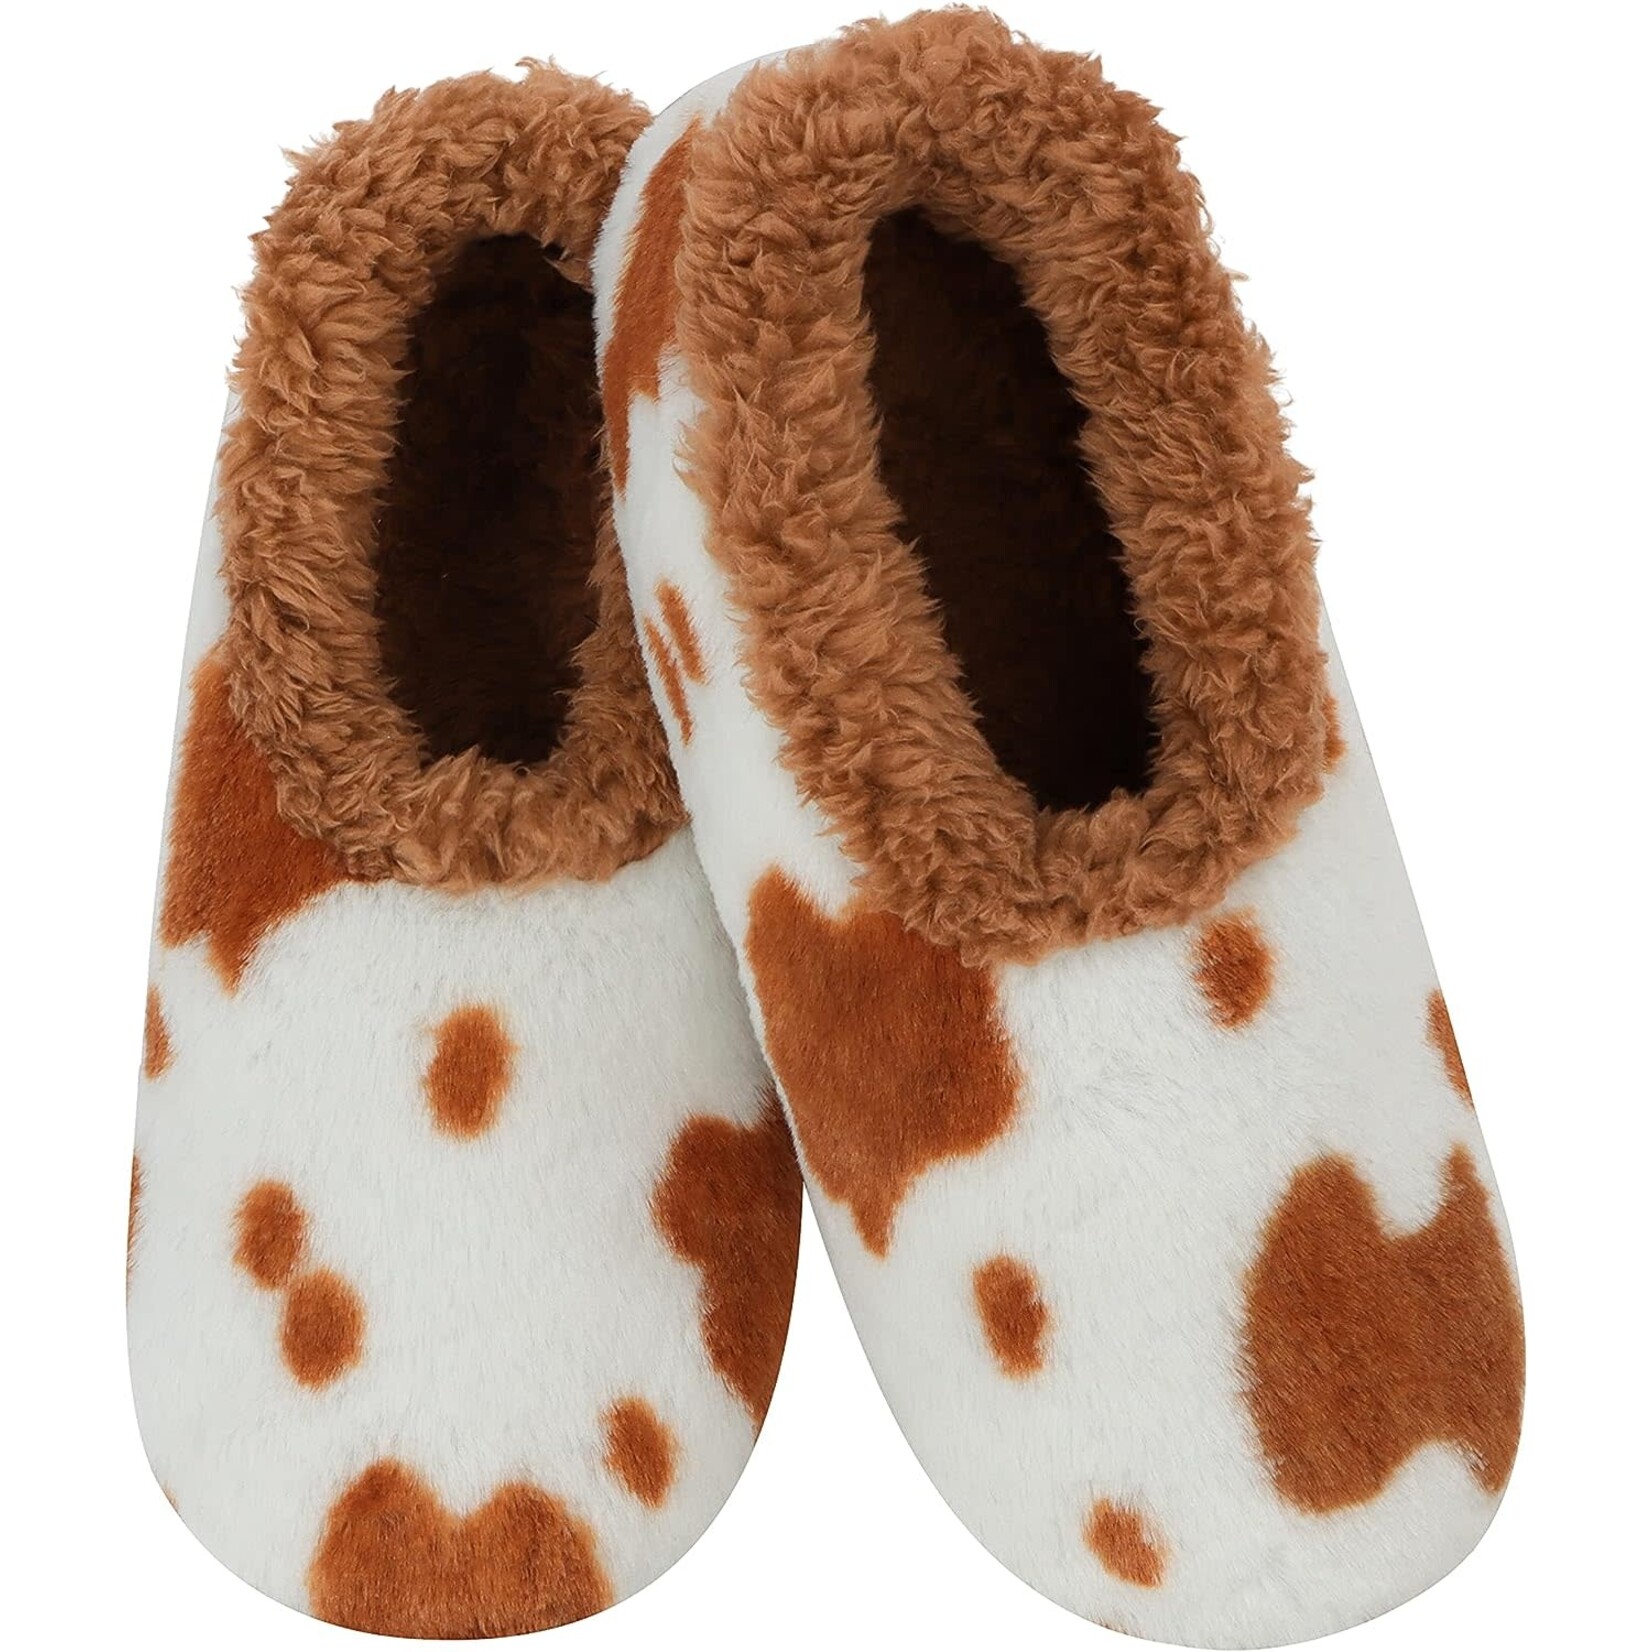 Snoozies Snoozies Tan Cow Slippers